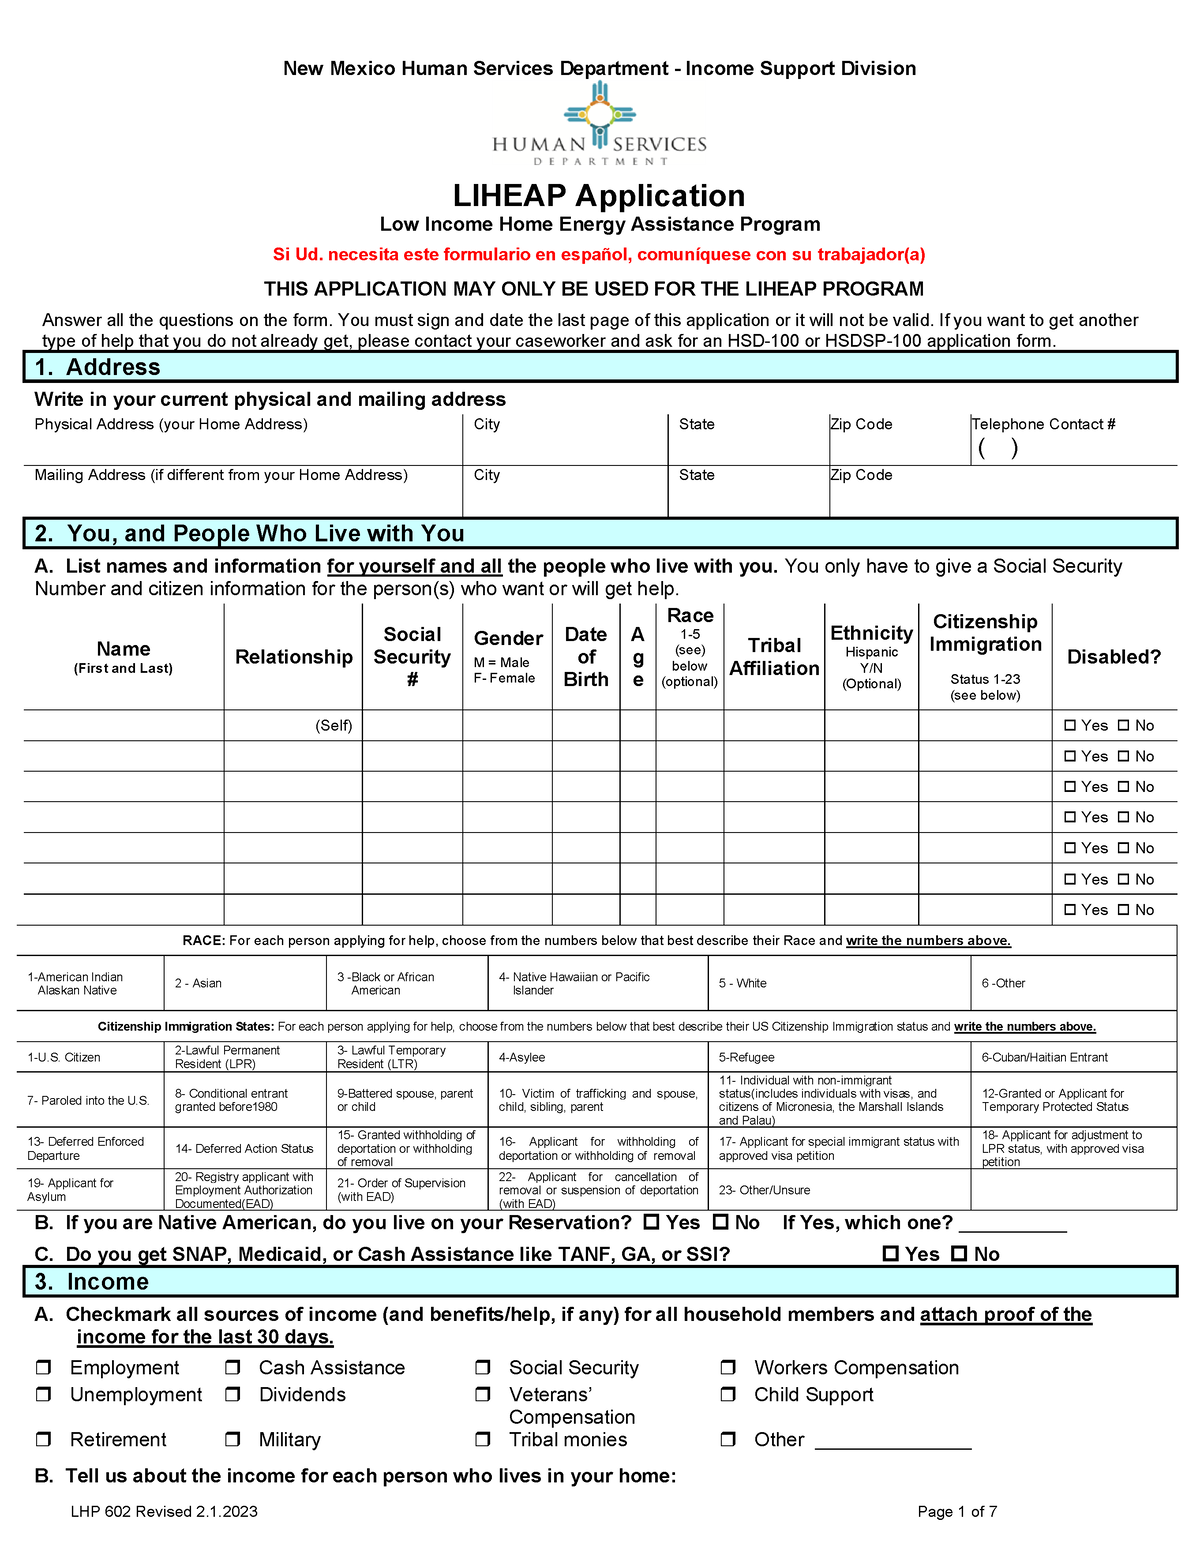 Lhp 602 English Liheap Application New Mexico Human Services Department Income Support 6478